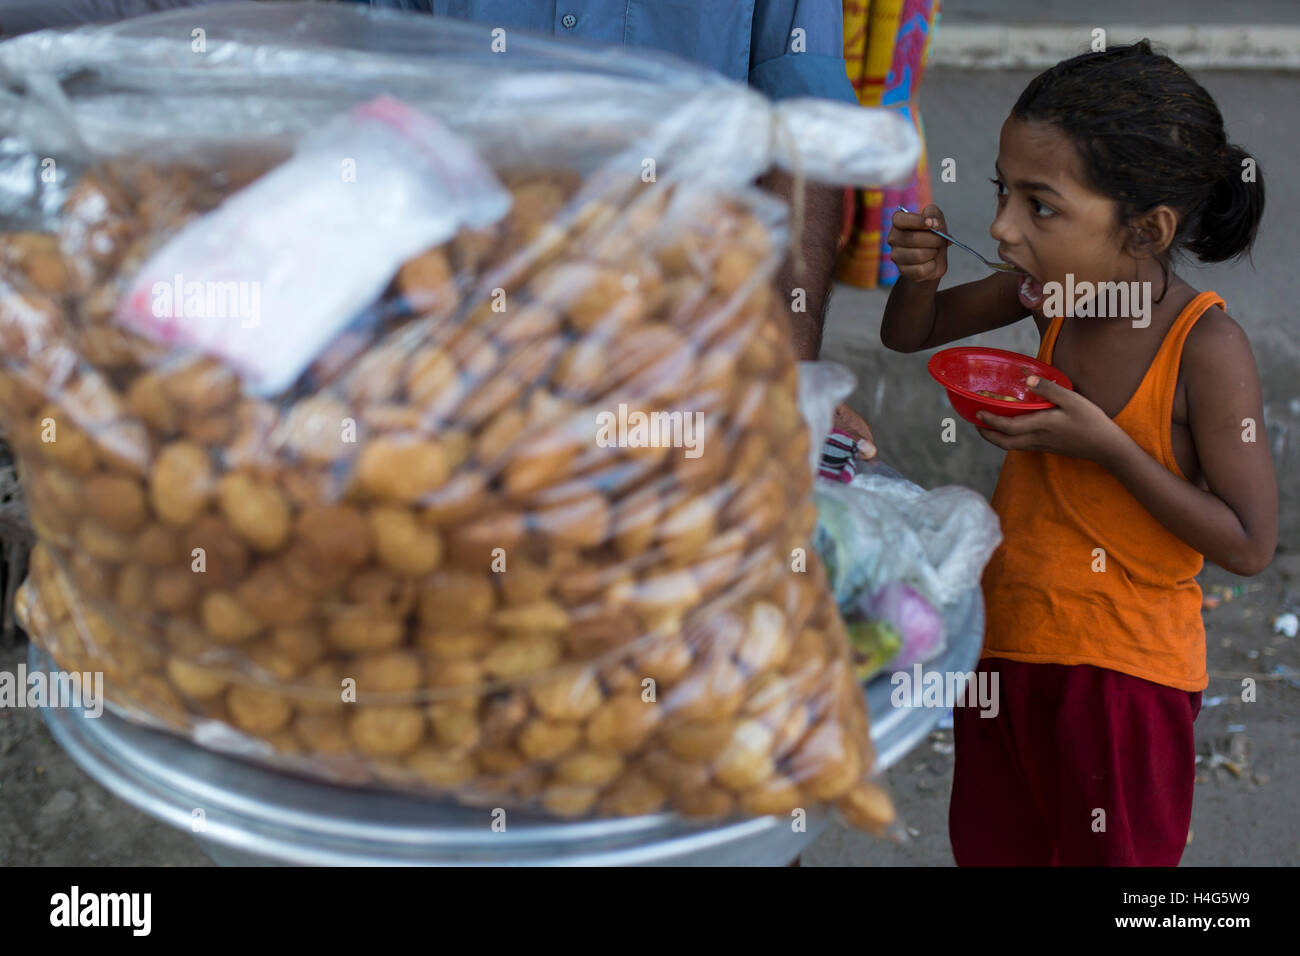 DHAKA, BANGLADESH - OCTOBER 15 : A child eating street food in Dhaka, Bangladesh, on October 15, 2016. Most of time food are being prepared with unhygienic handling. And those food are being sold in open air in a dirty city, which carry many germs. Unhygienic food items that are being sold on the streets of the capital are exposing the consumers to serious health hazards. Thousands of people are taking these foods everyday attracted by their cheap price and fine taste, not knowing what a great danger they are inviting for themselves by eating them.  Some 600 million people fall ill each year f Stock Photo